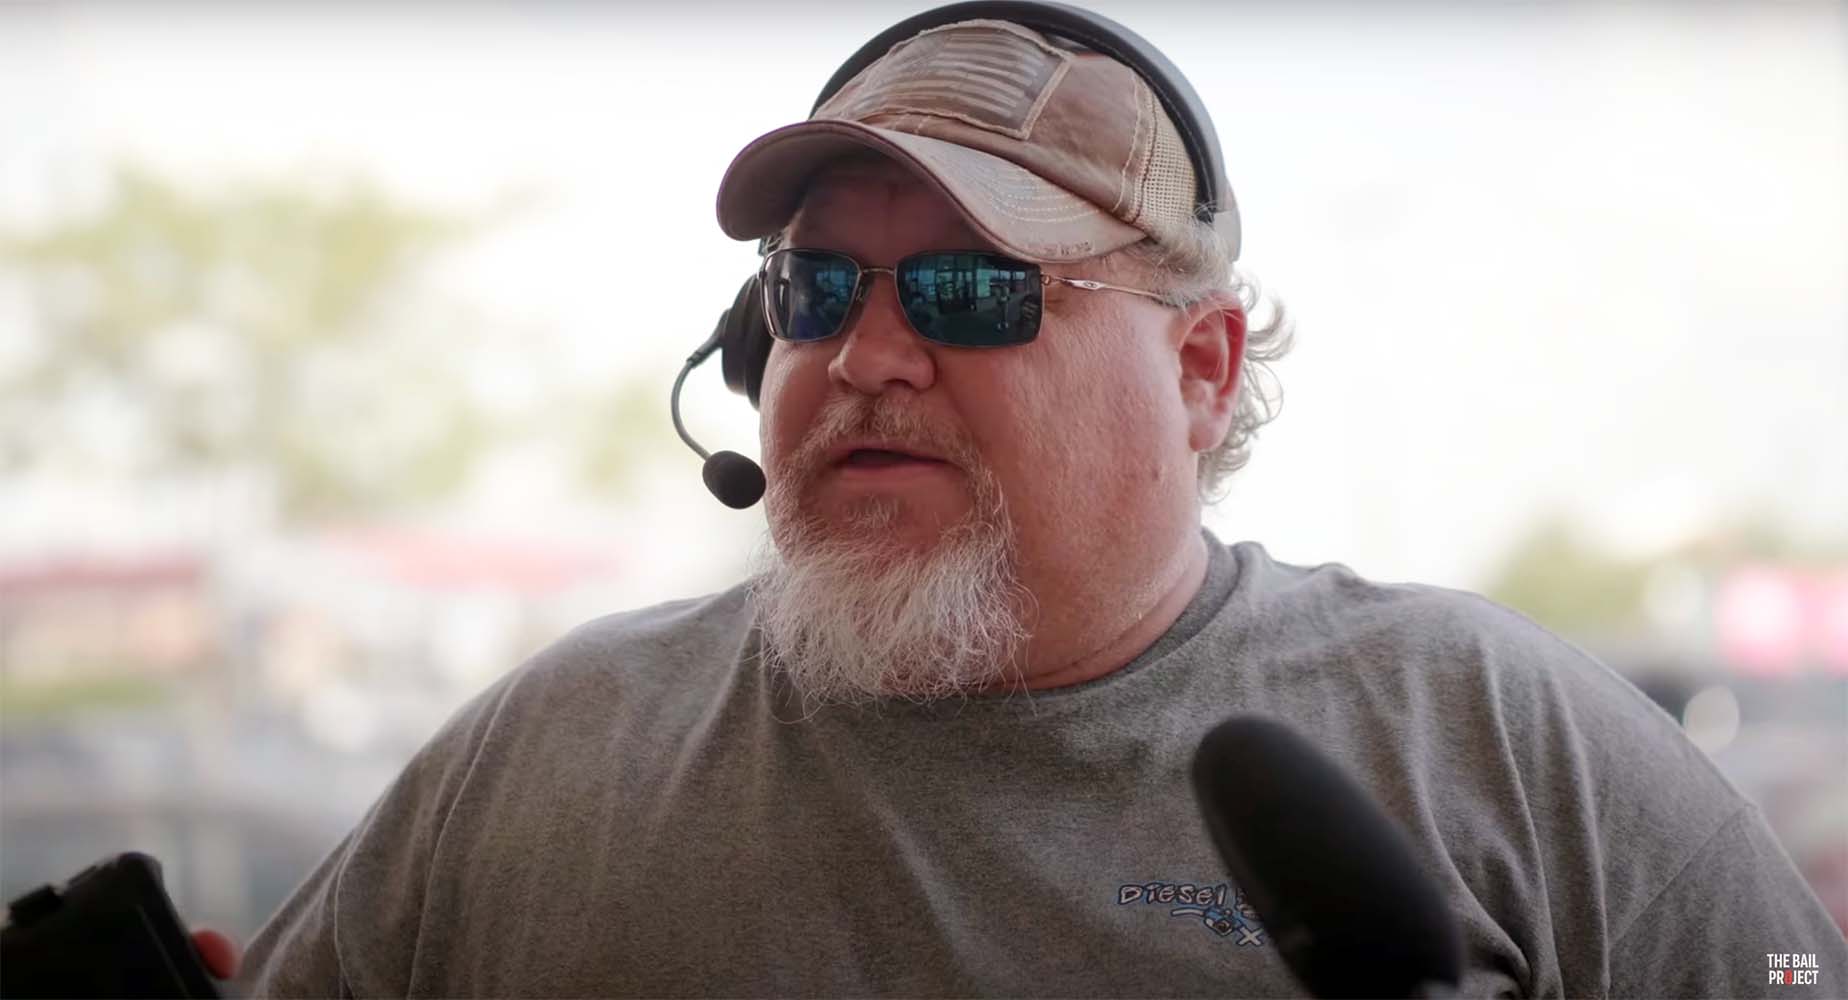 A bearded Kentucky resident wearing a headset and sunglasses speaking into a microphone